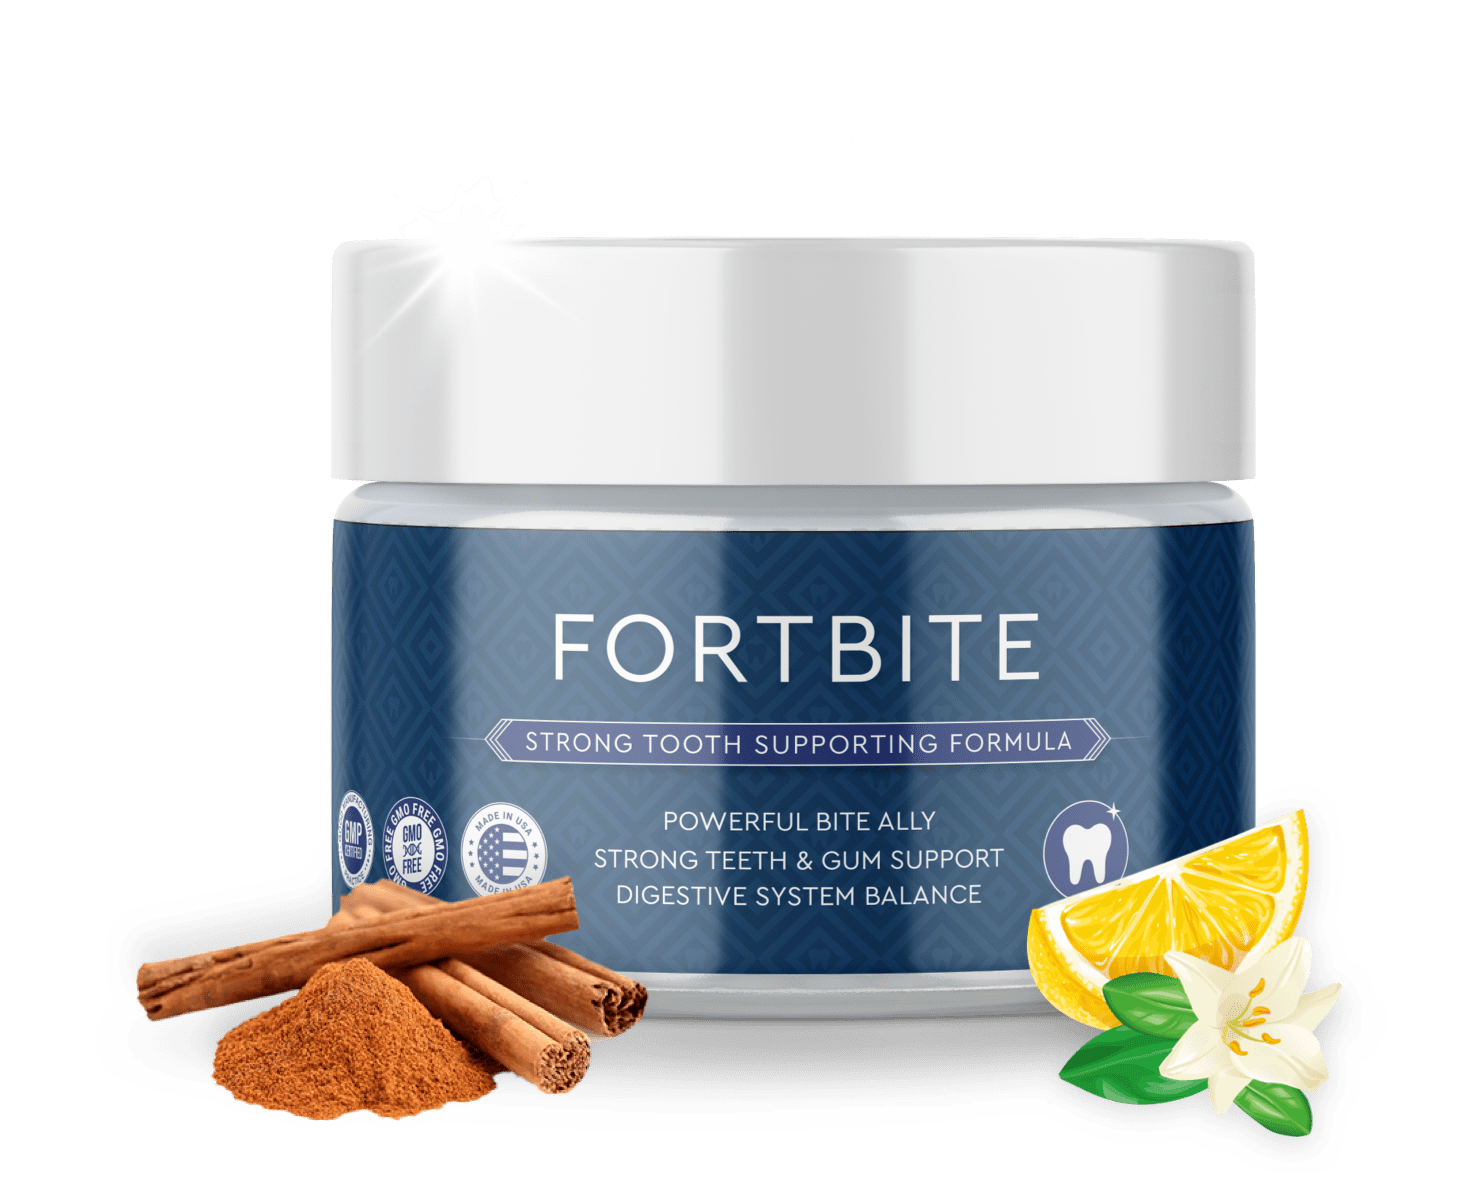 FortBite - Strong Tooth Supporting Formula